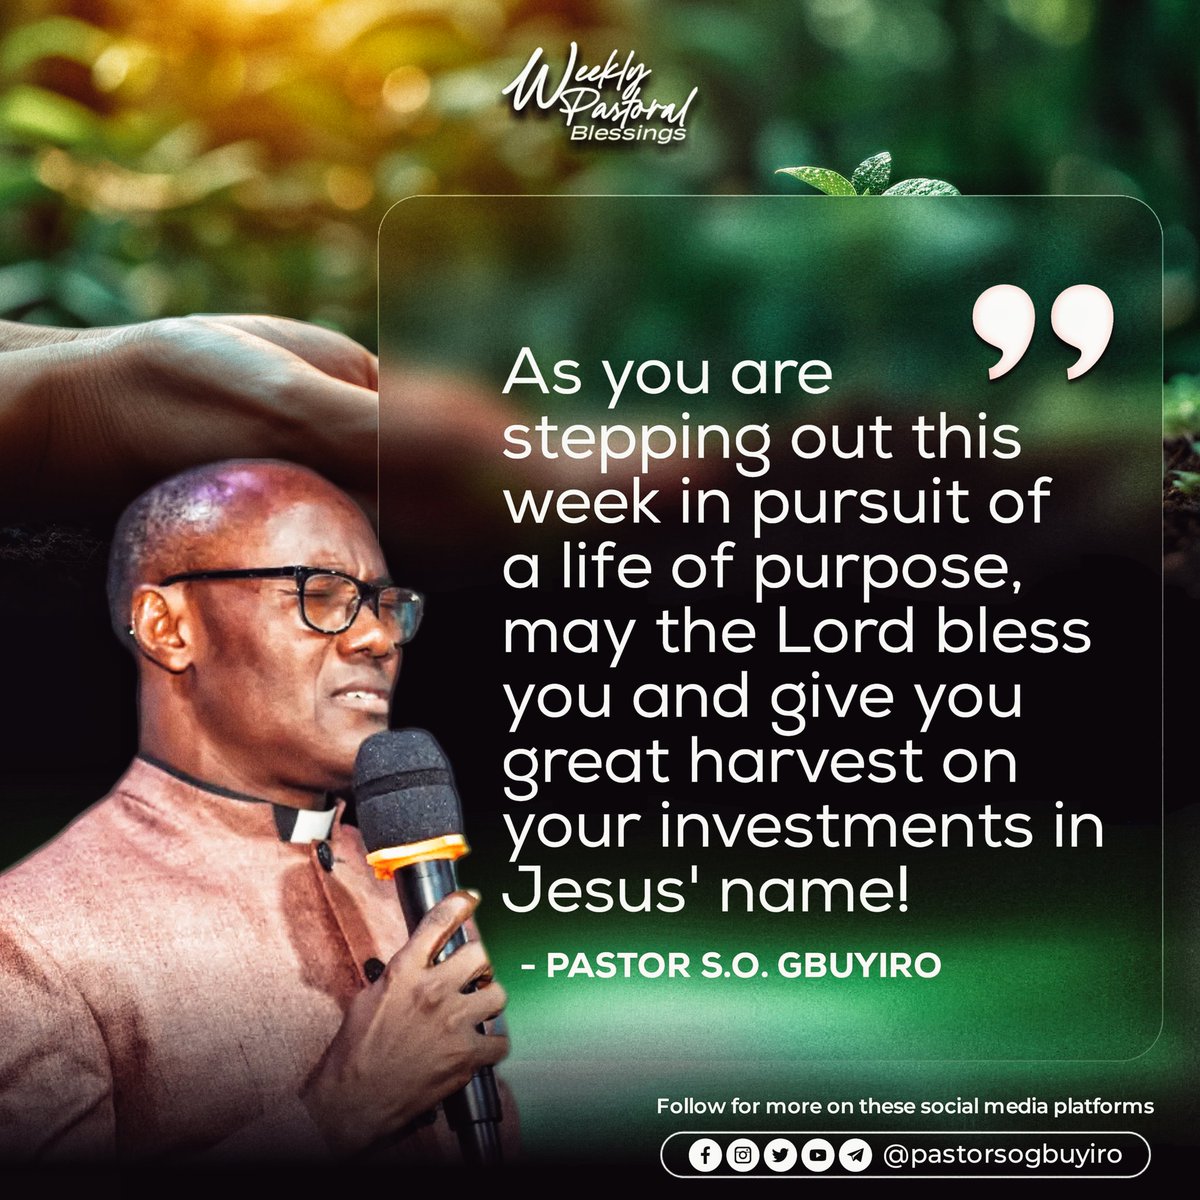 It's going to be a week of great harvest for you in Jesus name !

#weeklypastoralblessings 
#cacyouthdirector 
#pastorsogbuyiro
#newweekblessings 
#christapostolicchurch